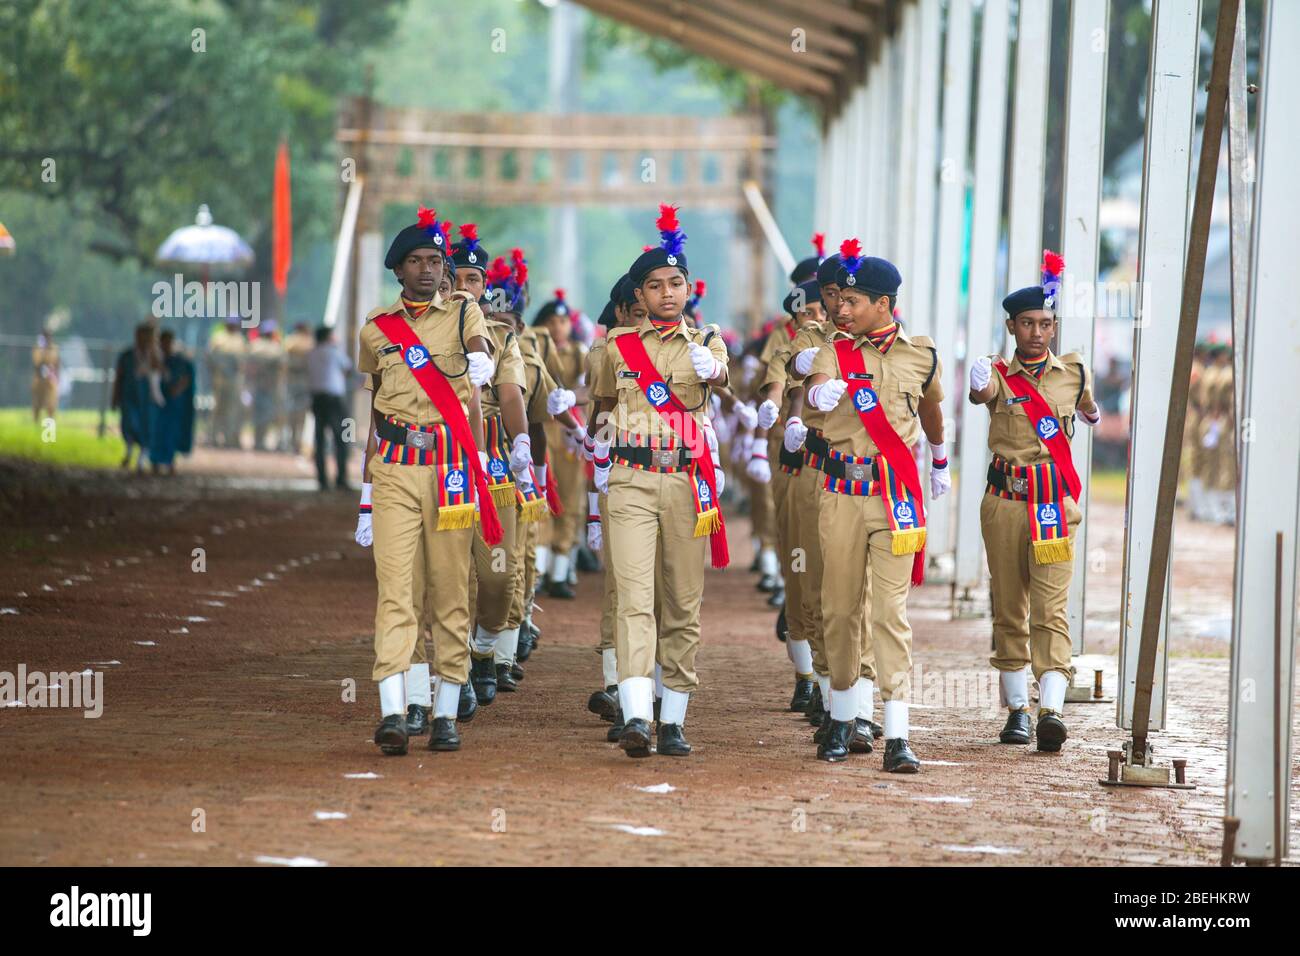 police,ncc cadets,indian women empower,college cadets,indian independence day parade,indian republic parade,thrissur,kerala,india,parade ground Stock Photo